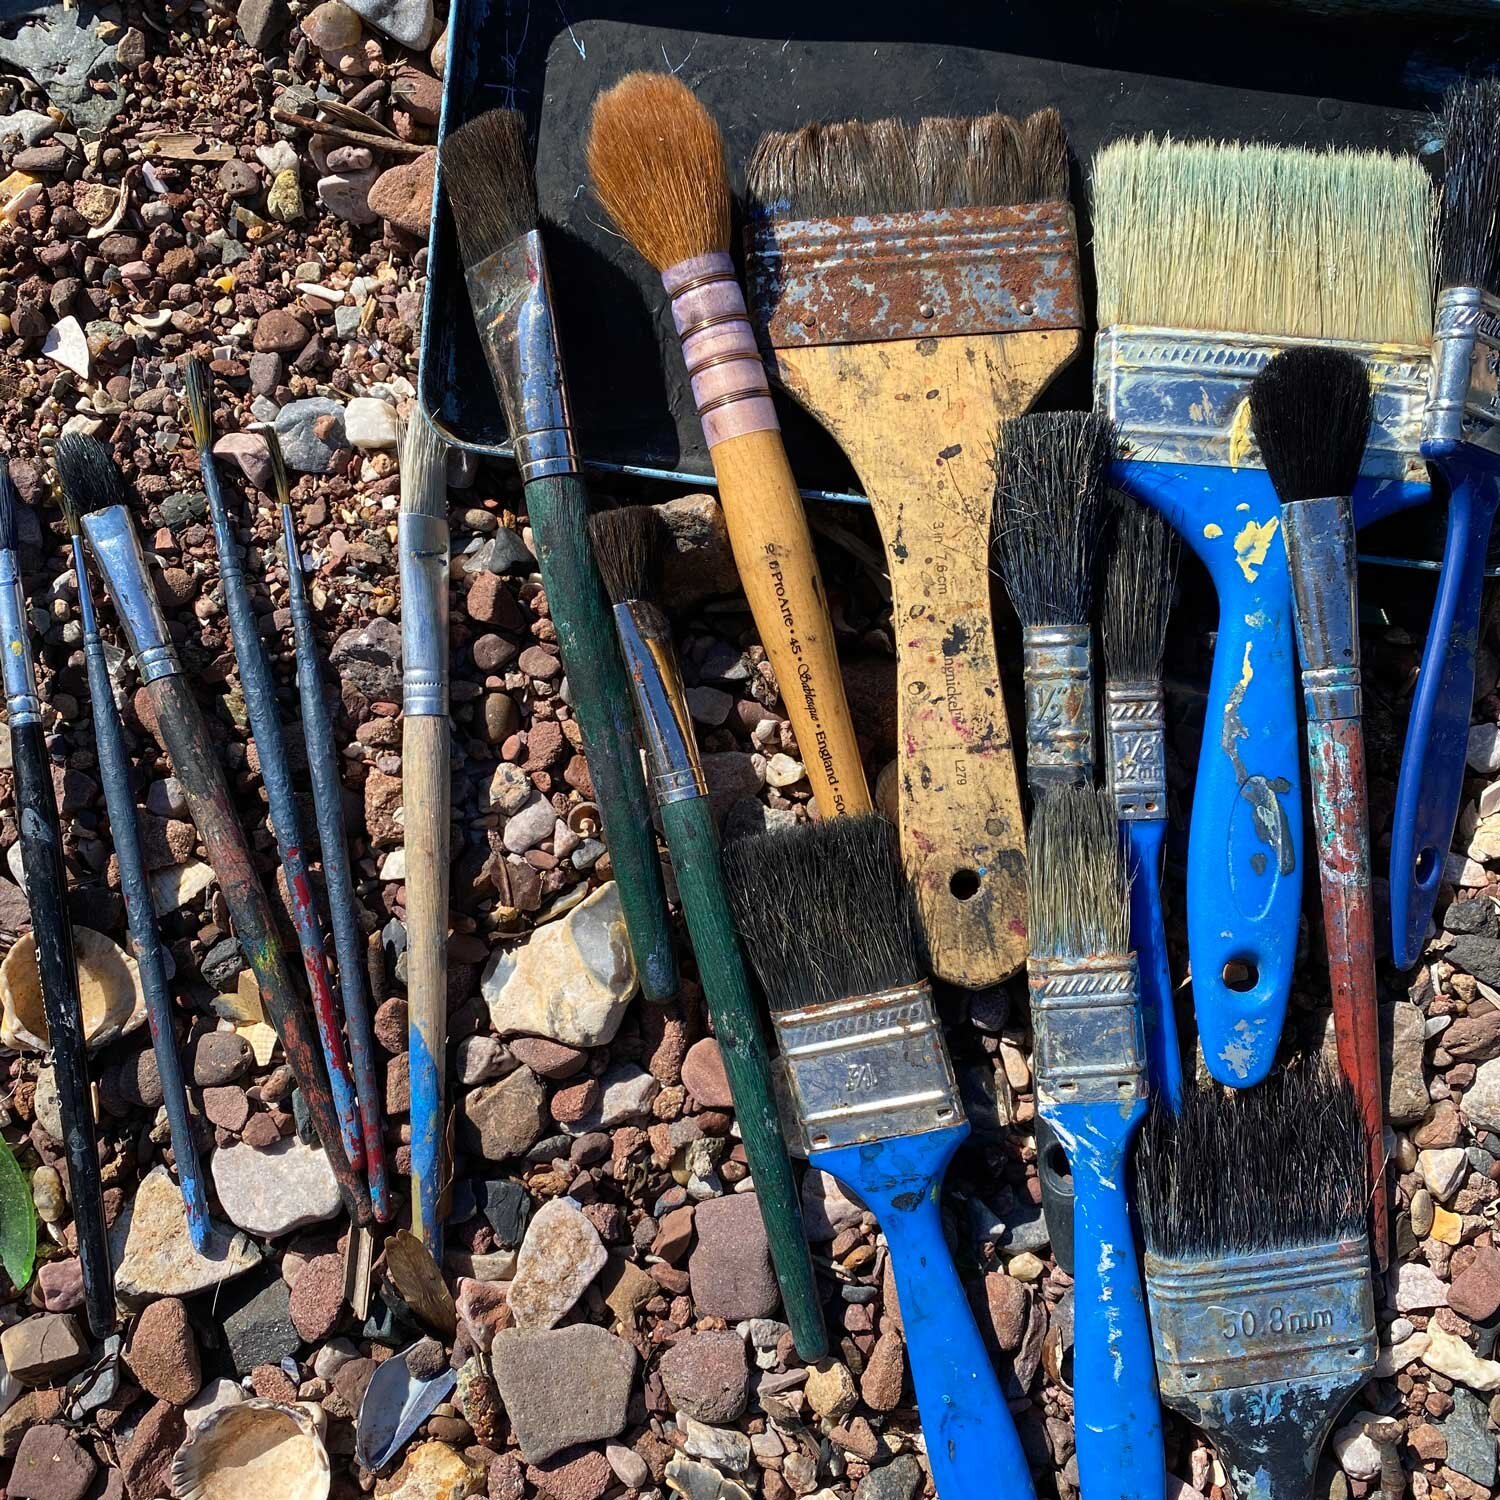 Sam Boughton selection of paint brushes